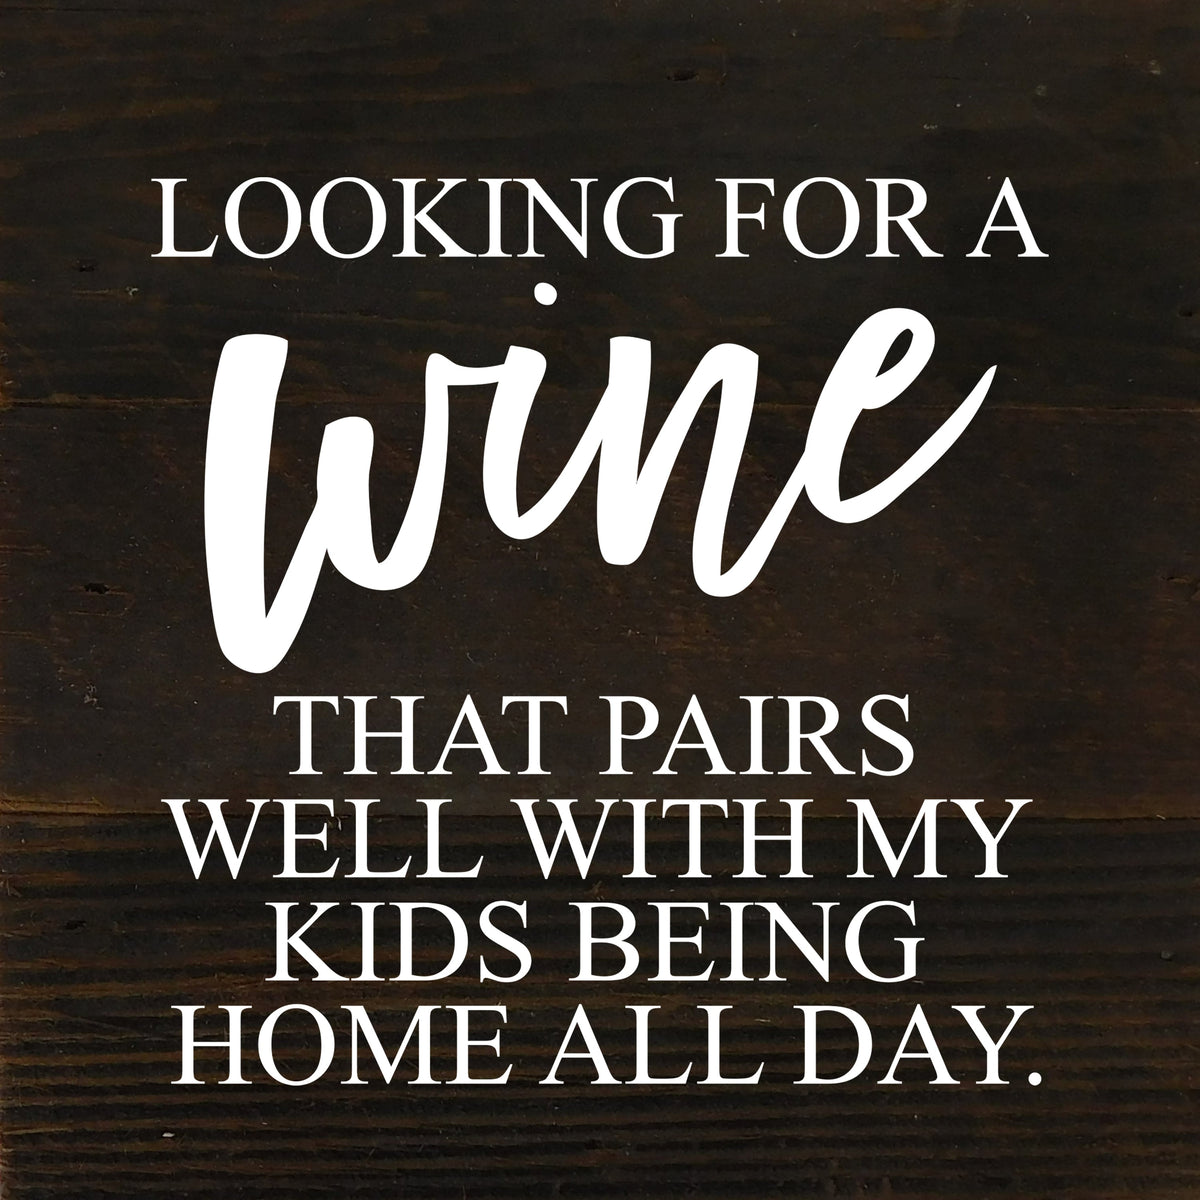 Looking for a wine that pairs well with my kids being home all day. / 6"x6" Reclaimed Wood Sign